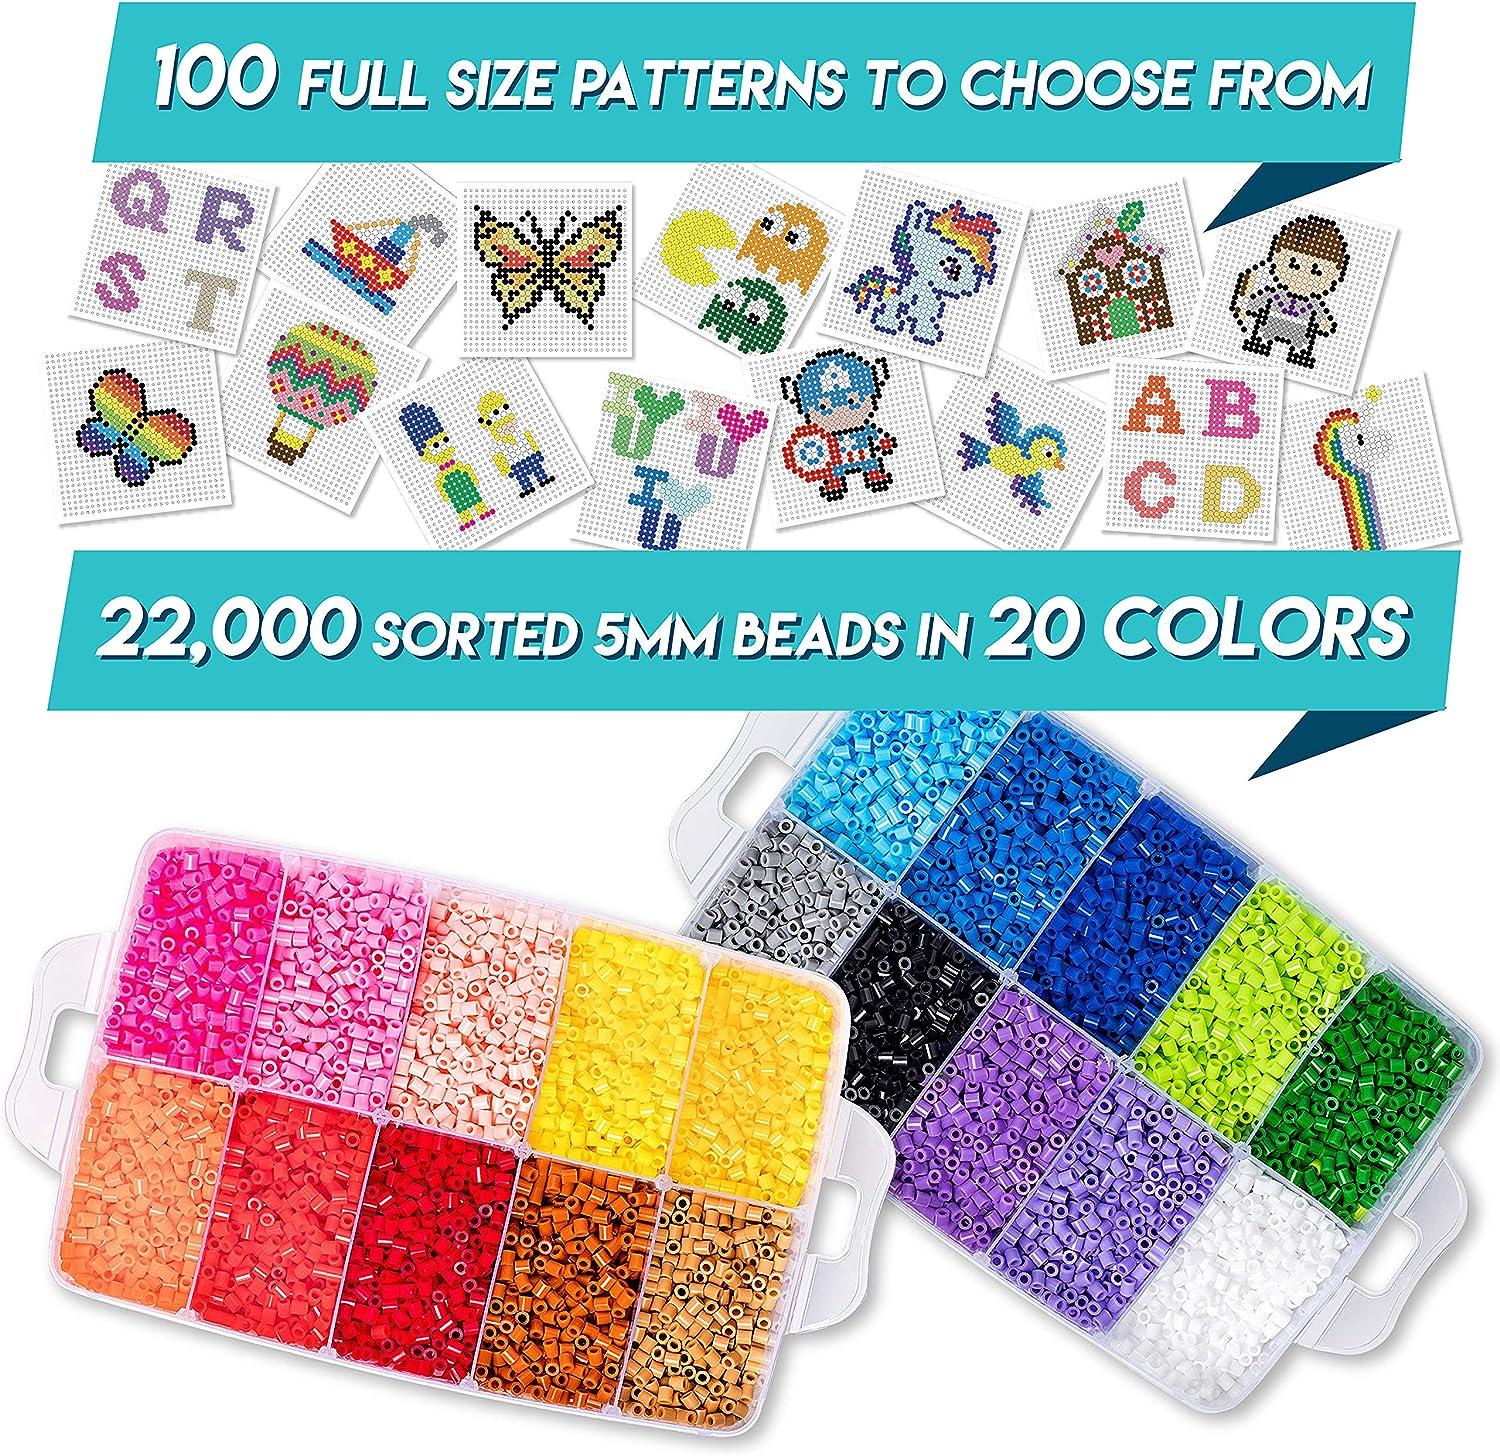 Safely Designed Hama Beads For Fun And Learning 